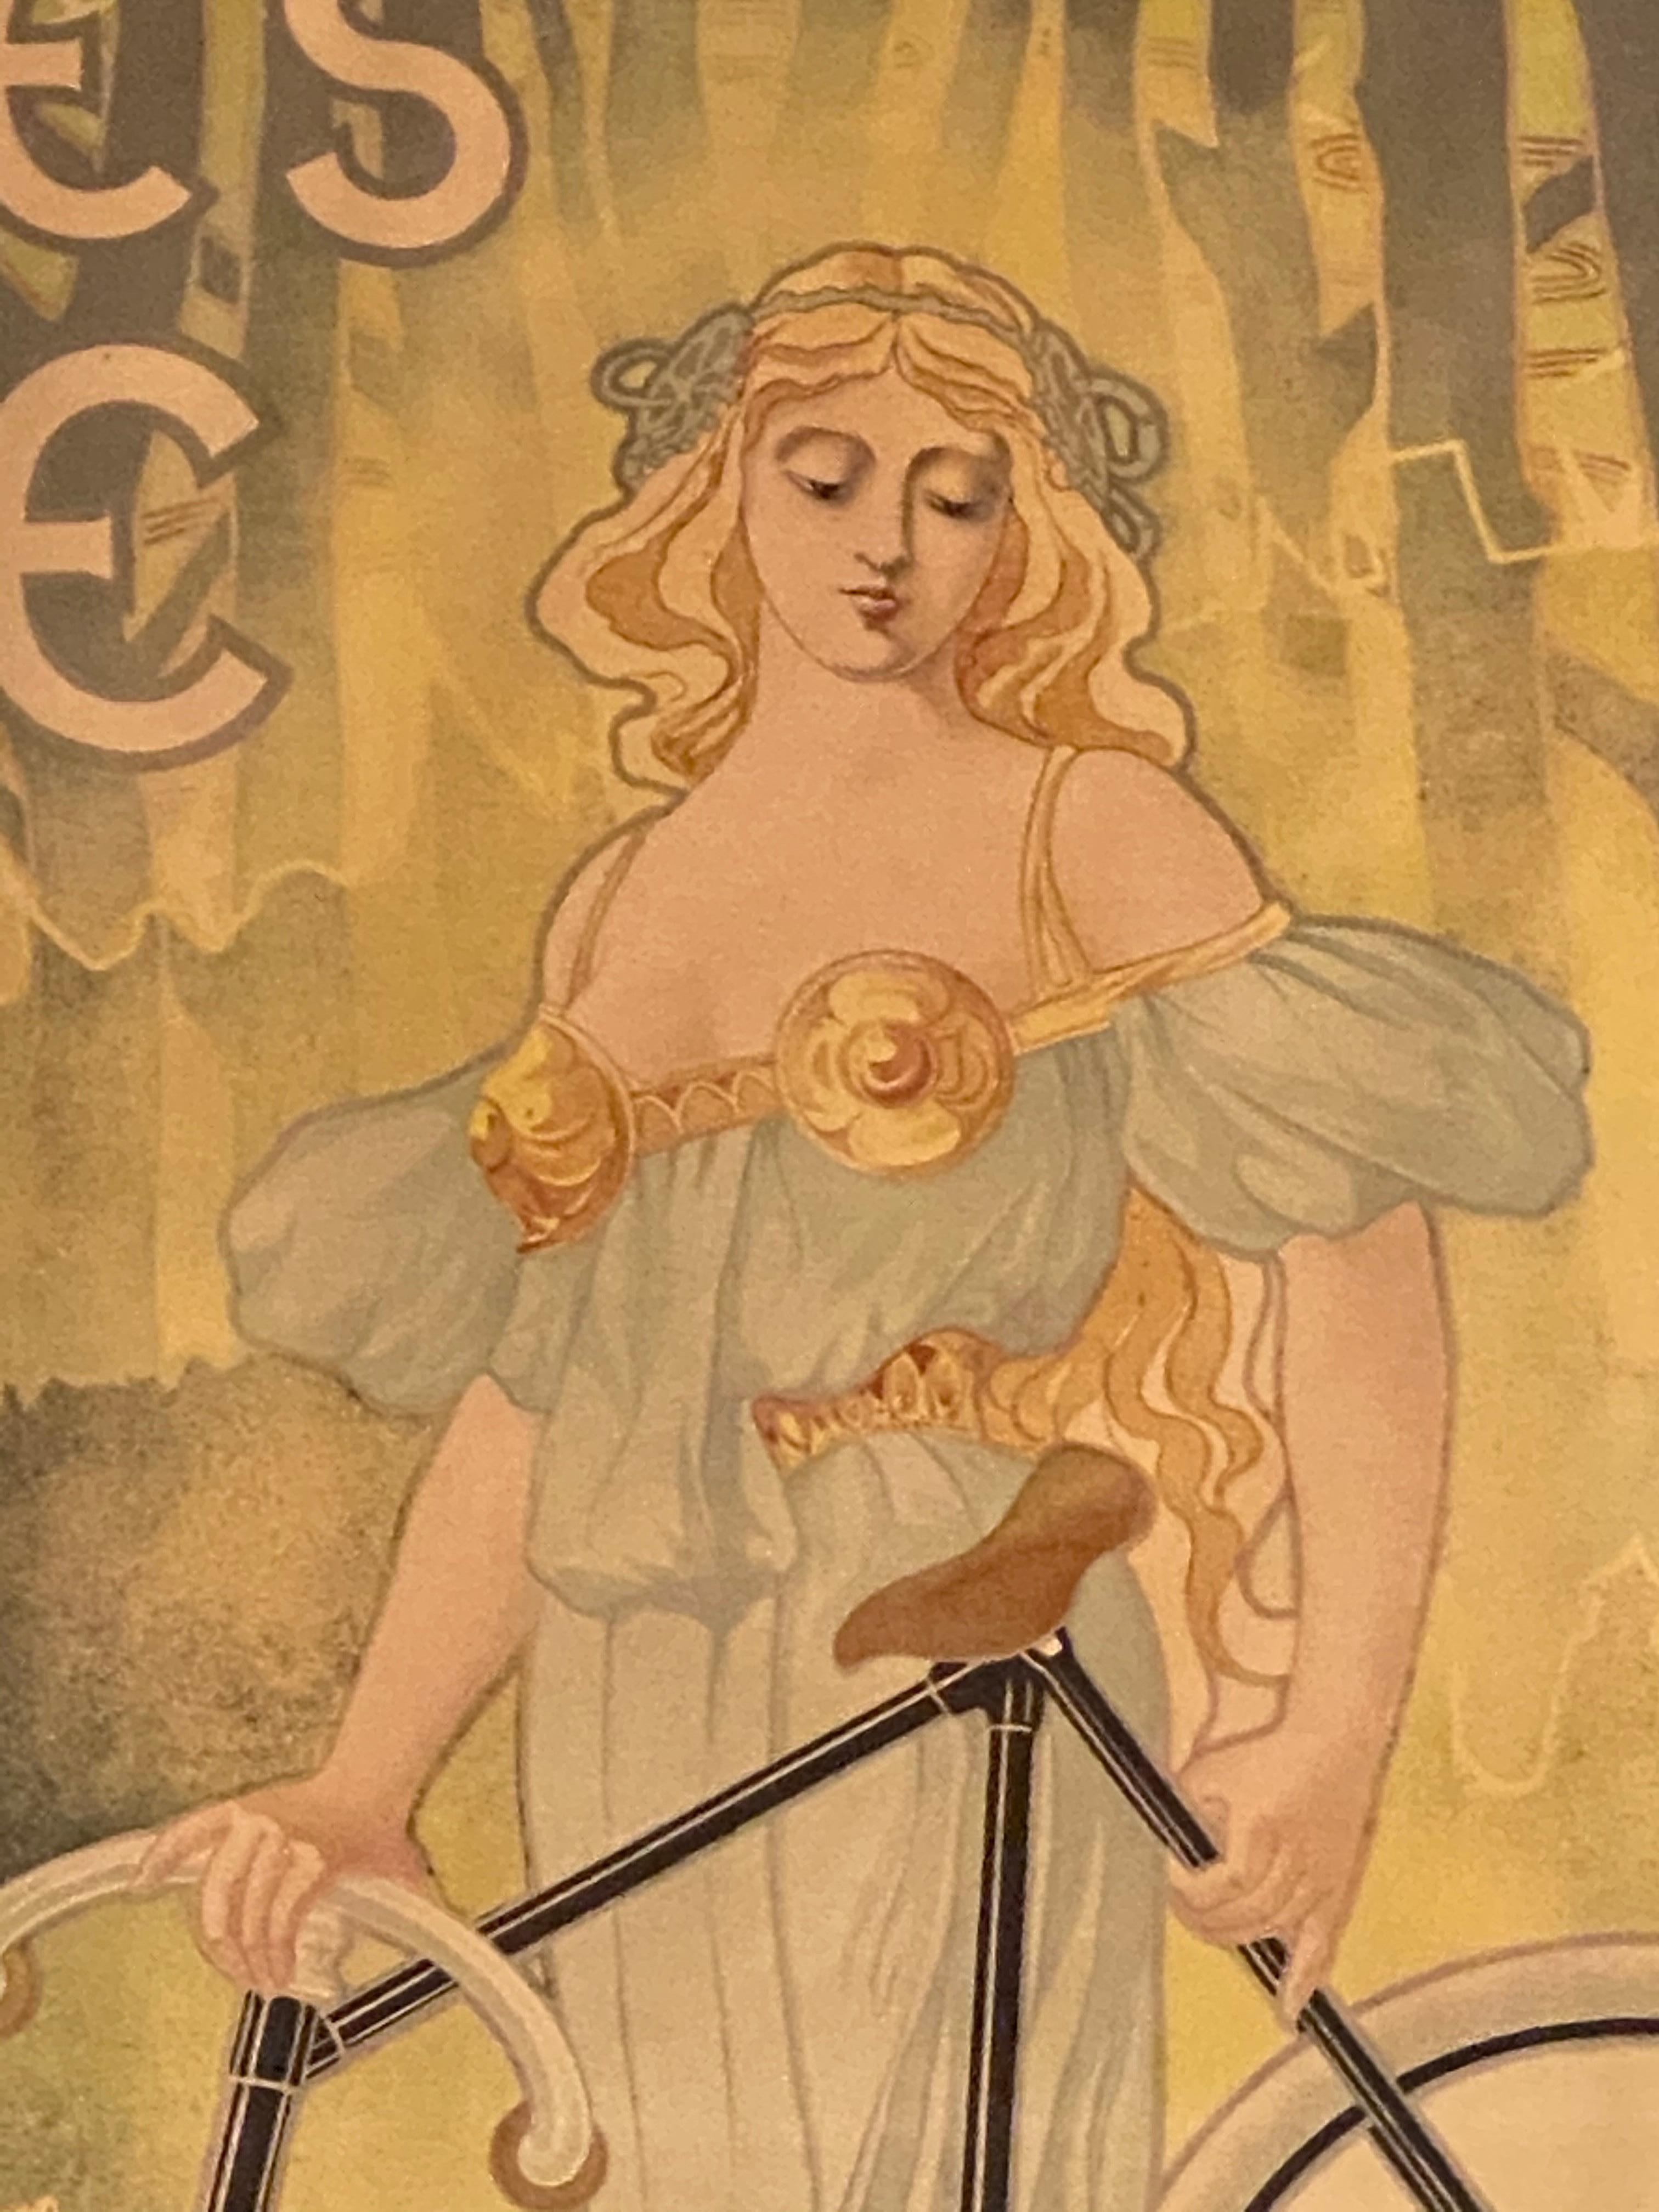 Cycles Rudge Lucien Charmet vintage poster framed in a gilt gold frame under plexi glass. By Jacques Debut / Artist dated 1897.